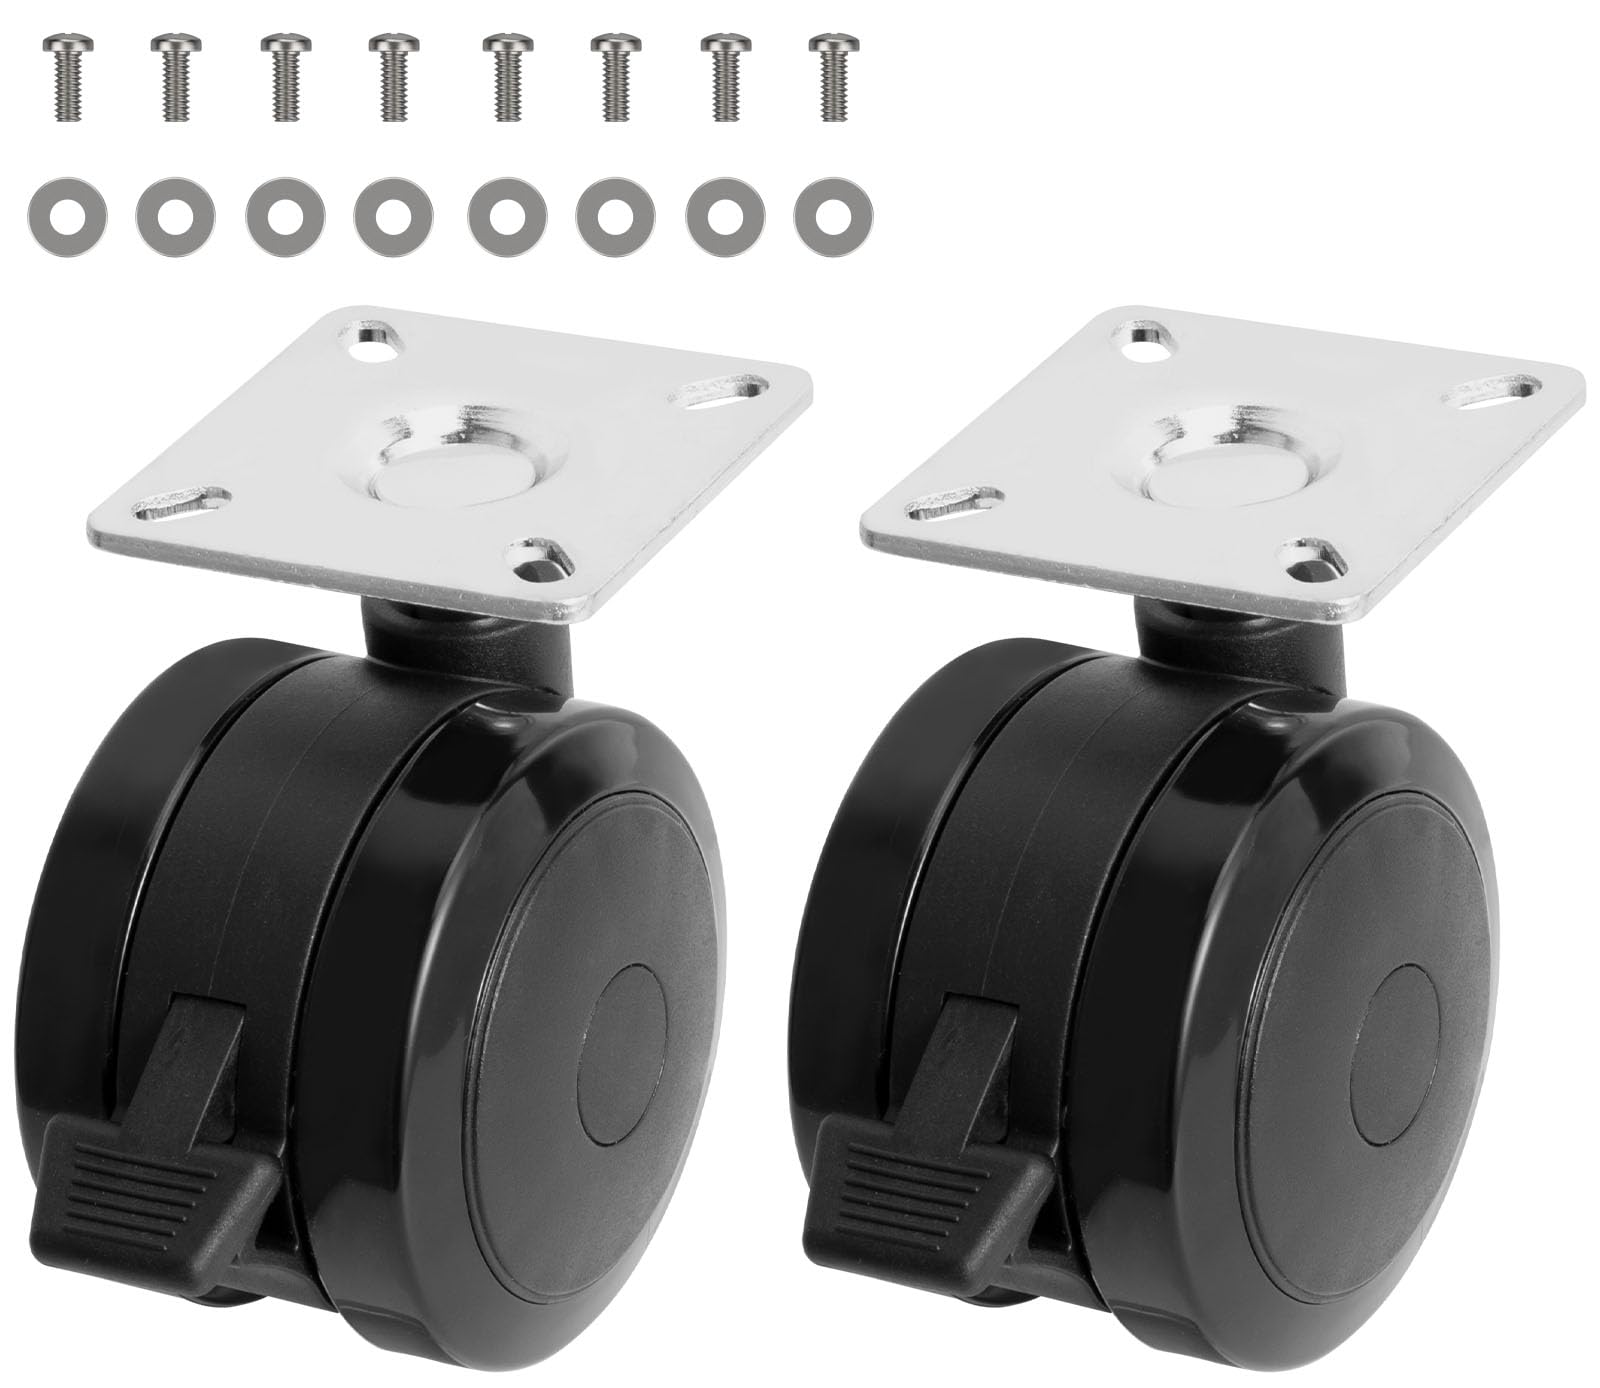 69828 Locking Casters for Weber Spirit Grill Replacement Wheels Weber Spirit E215 E210 S210 E220 S220 Grill Parts Spirit E310 Spirit E320 S310 S320 Grill Wheels Weber Spirit 200 & 300 SER Grills, 2PCS